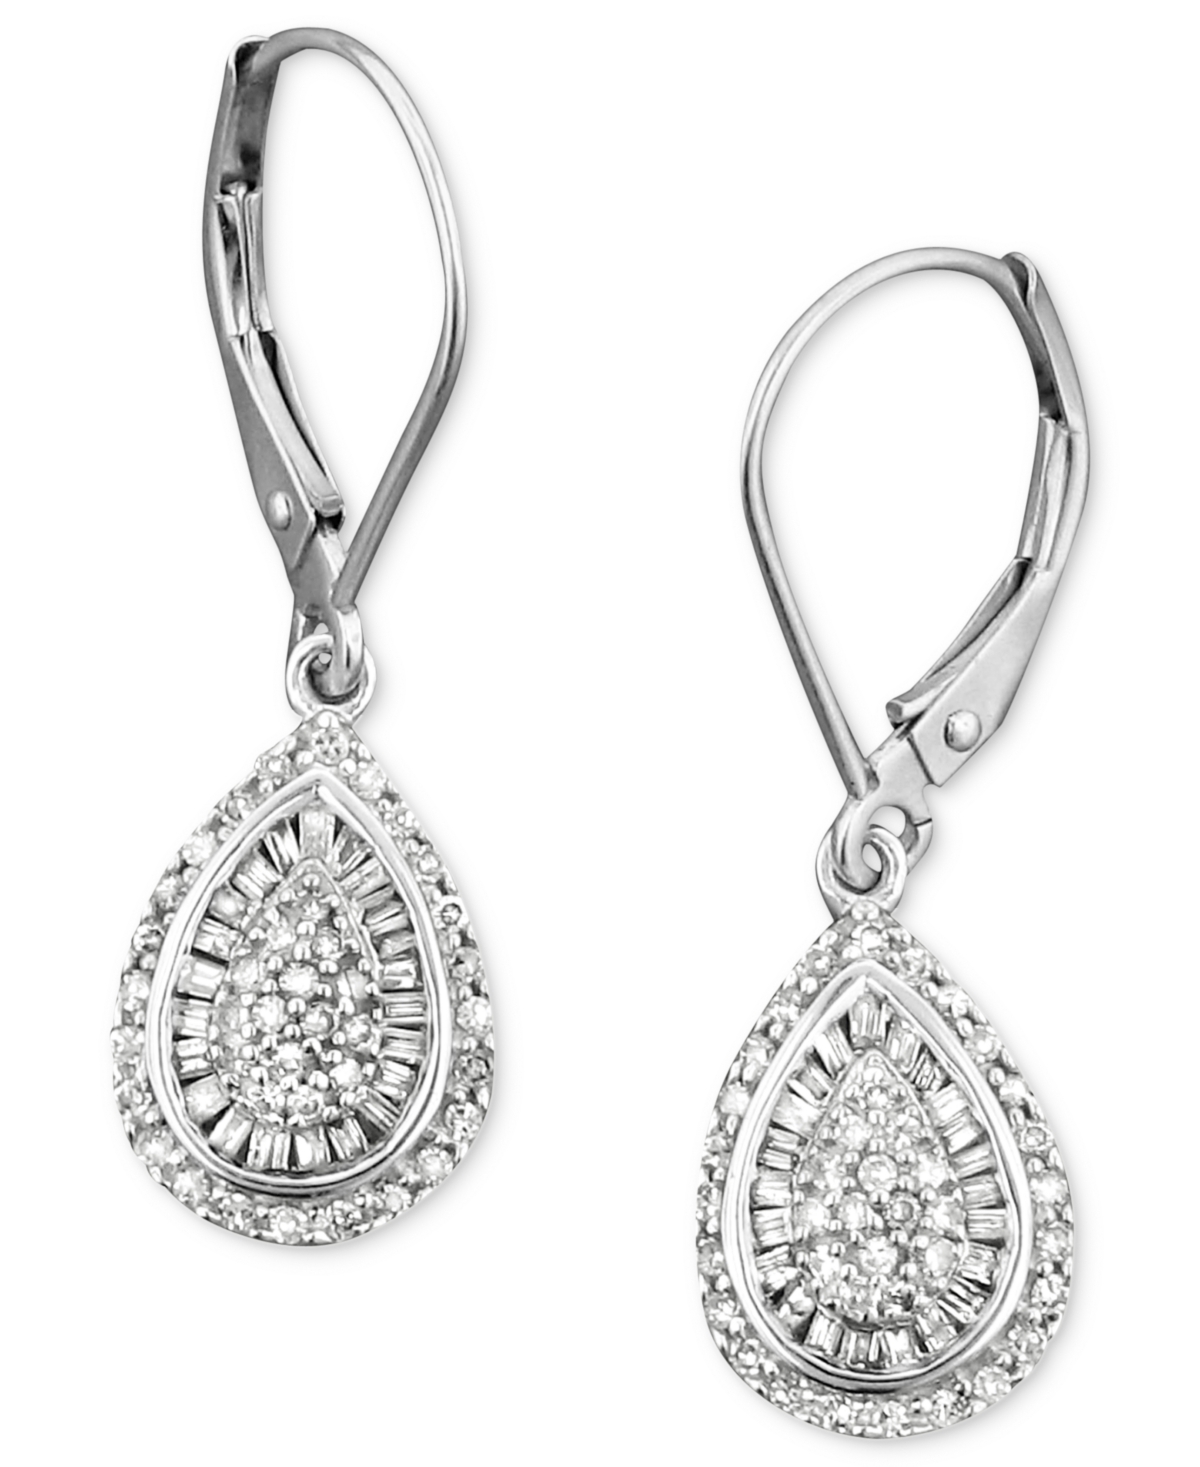 Diamond Teardrop Earrings (1/2 ct. t.w.) in 14k White, Yellow or Rose Gold, Created for Macy's - Yellow Gold